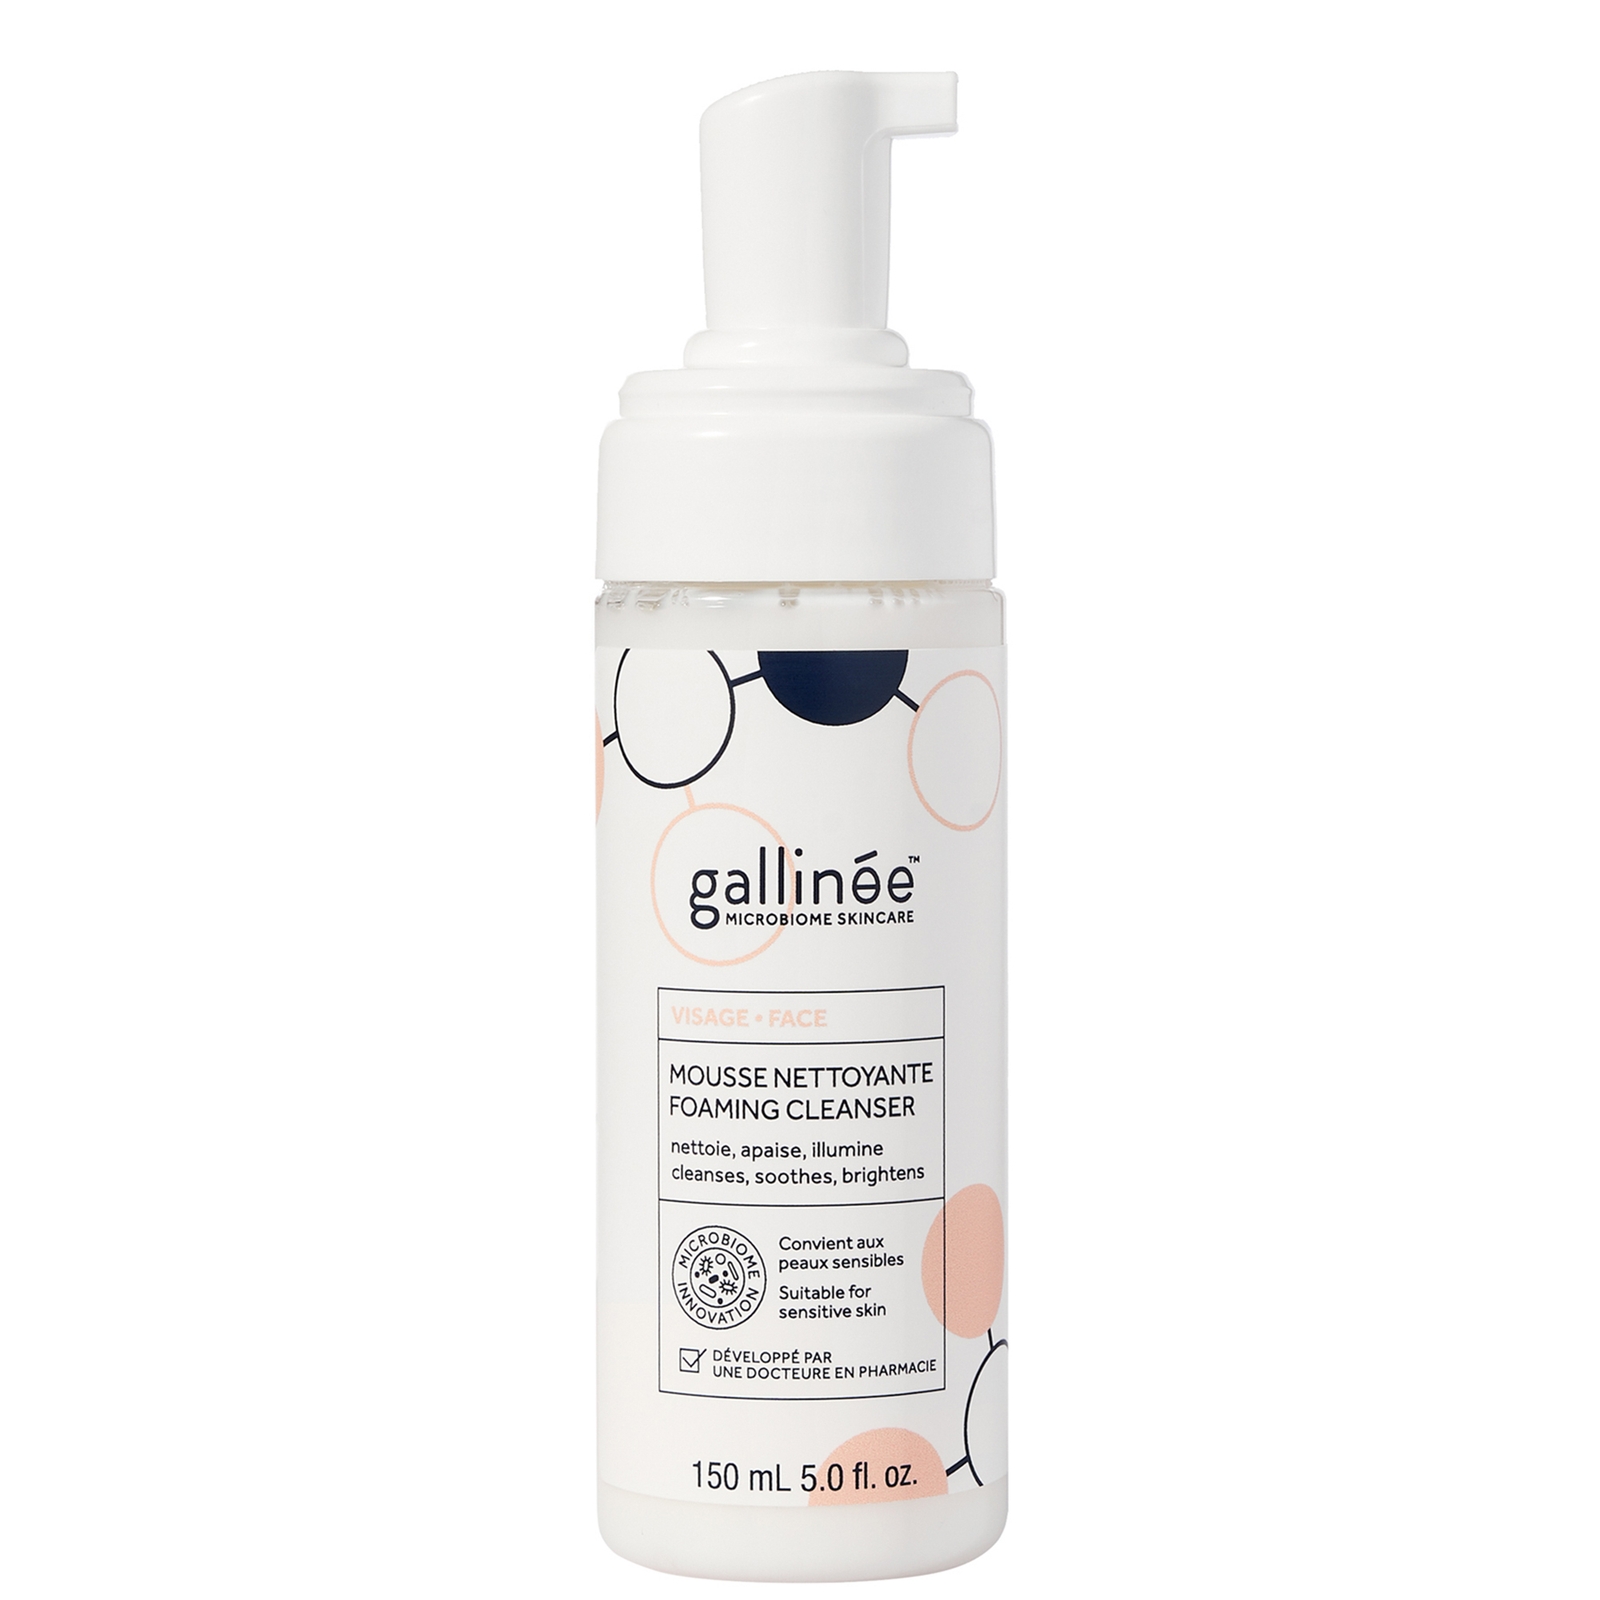 Photos - Facial / Body Cleansing Product Gallinée Prebiotic Foaming Facial Cleanser 150ml